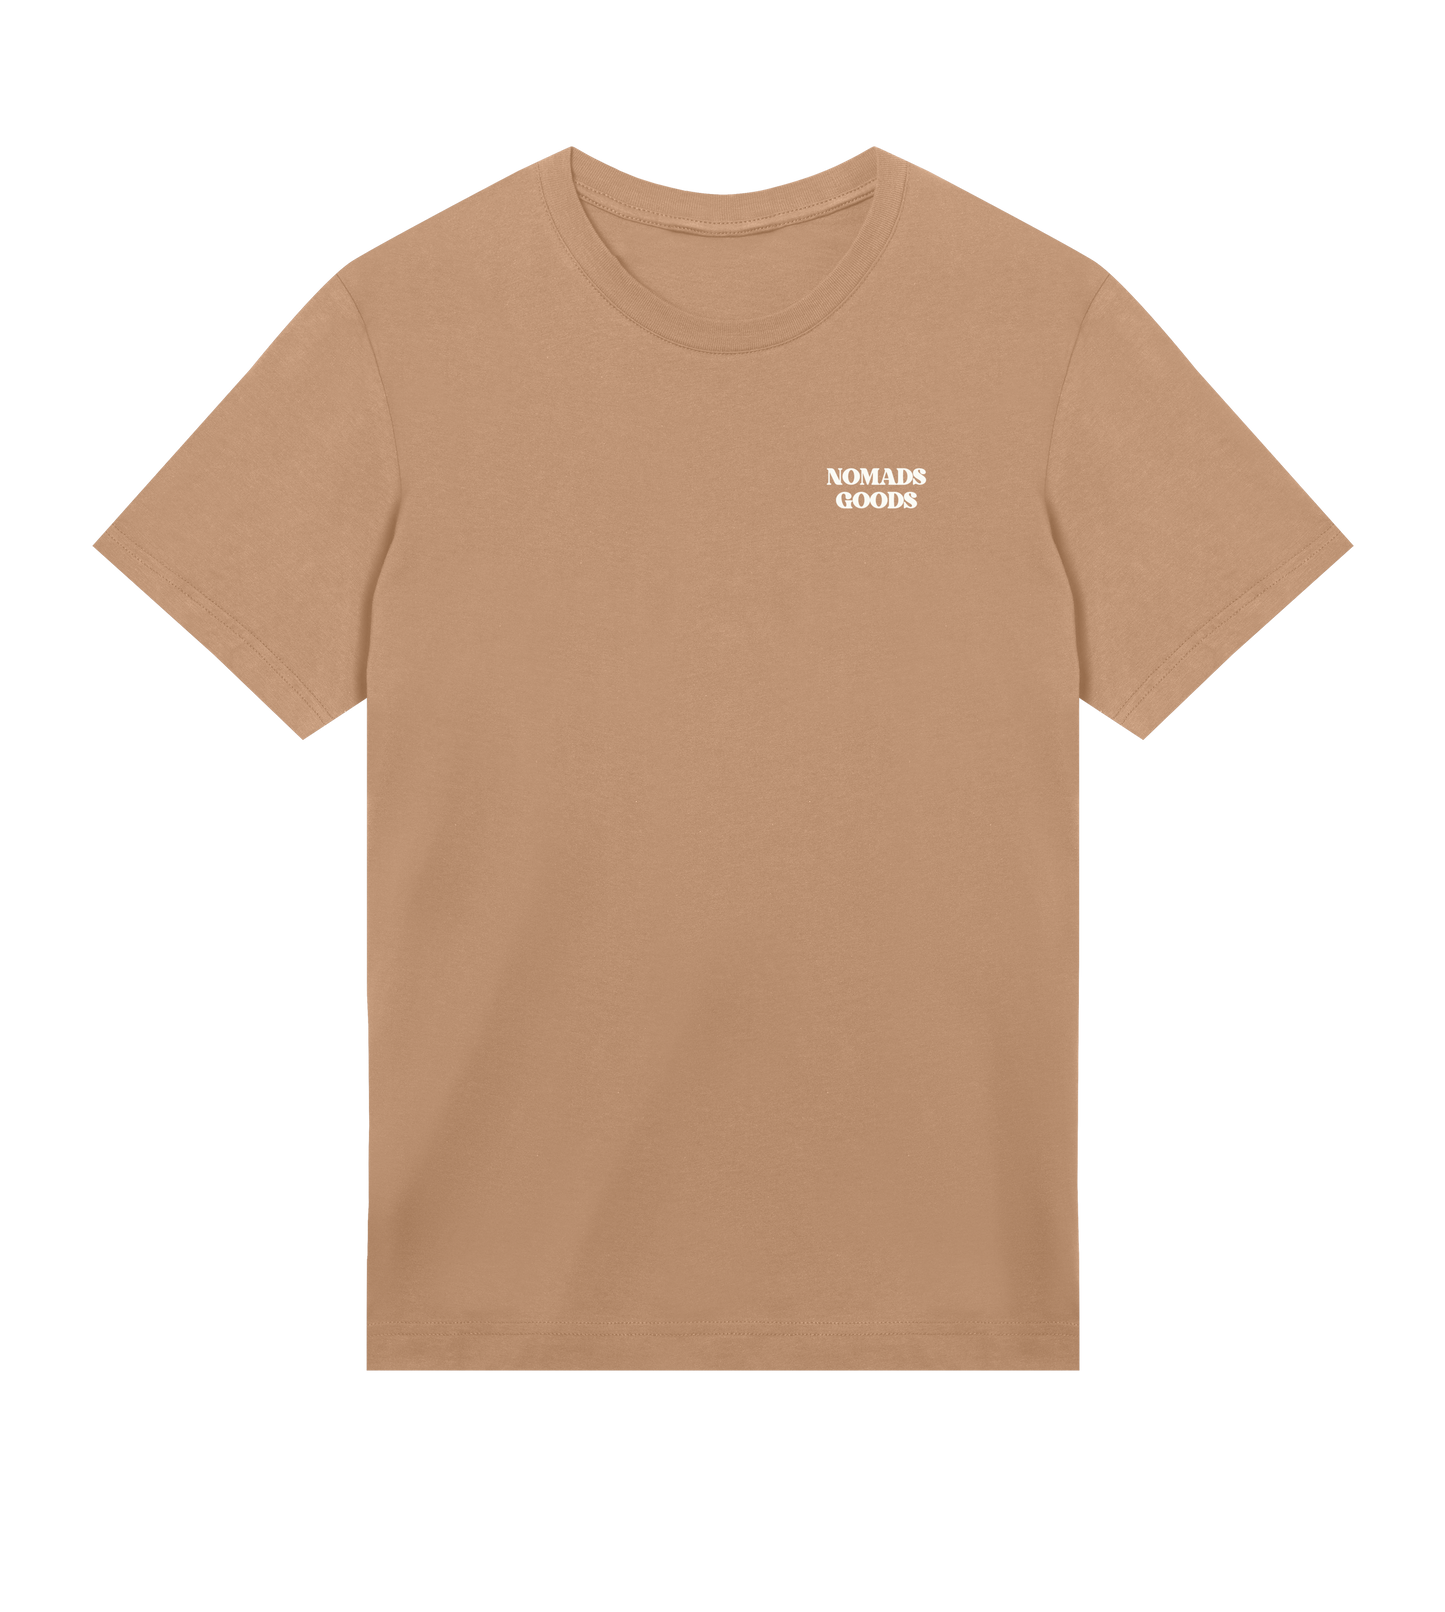 'Time To Visit A Friend' Men's Regular Tee - Sand